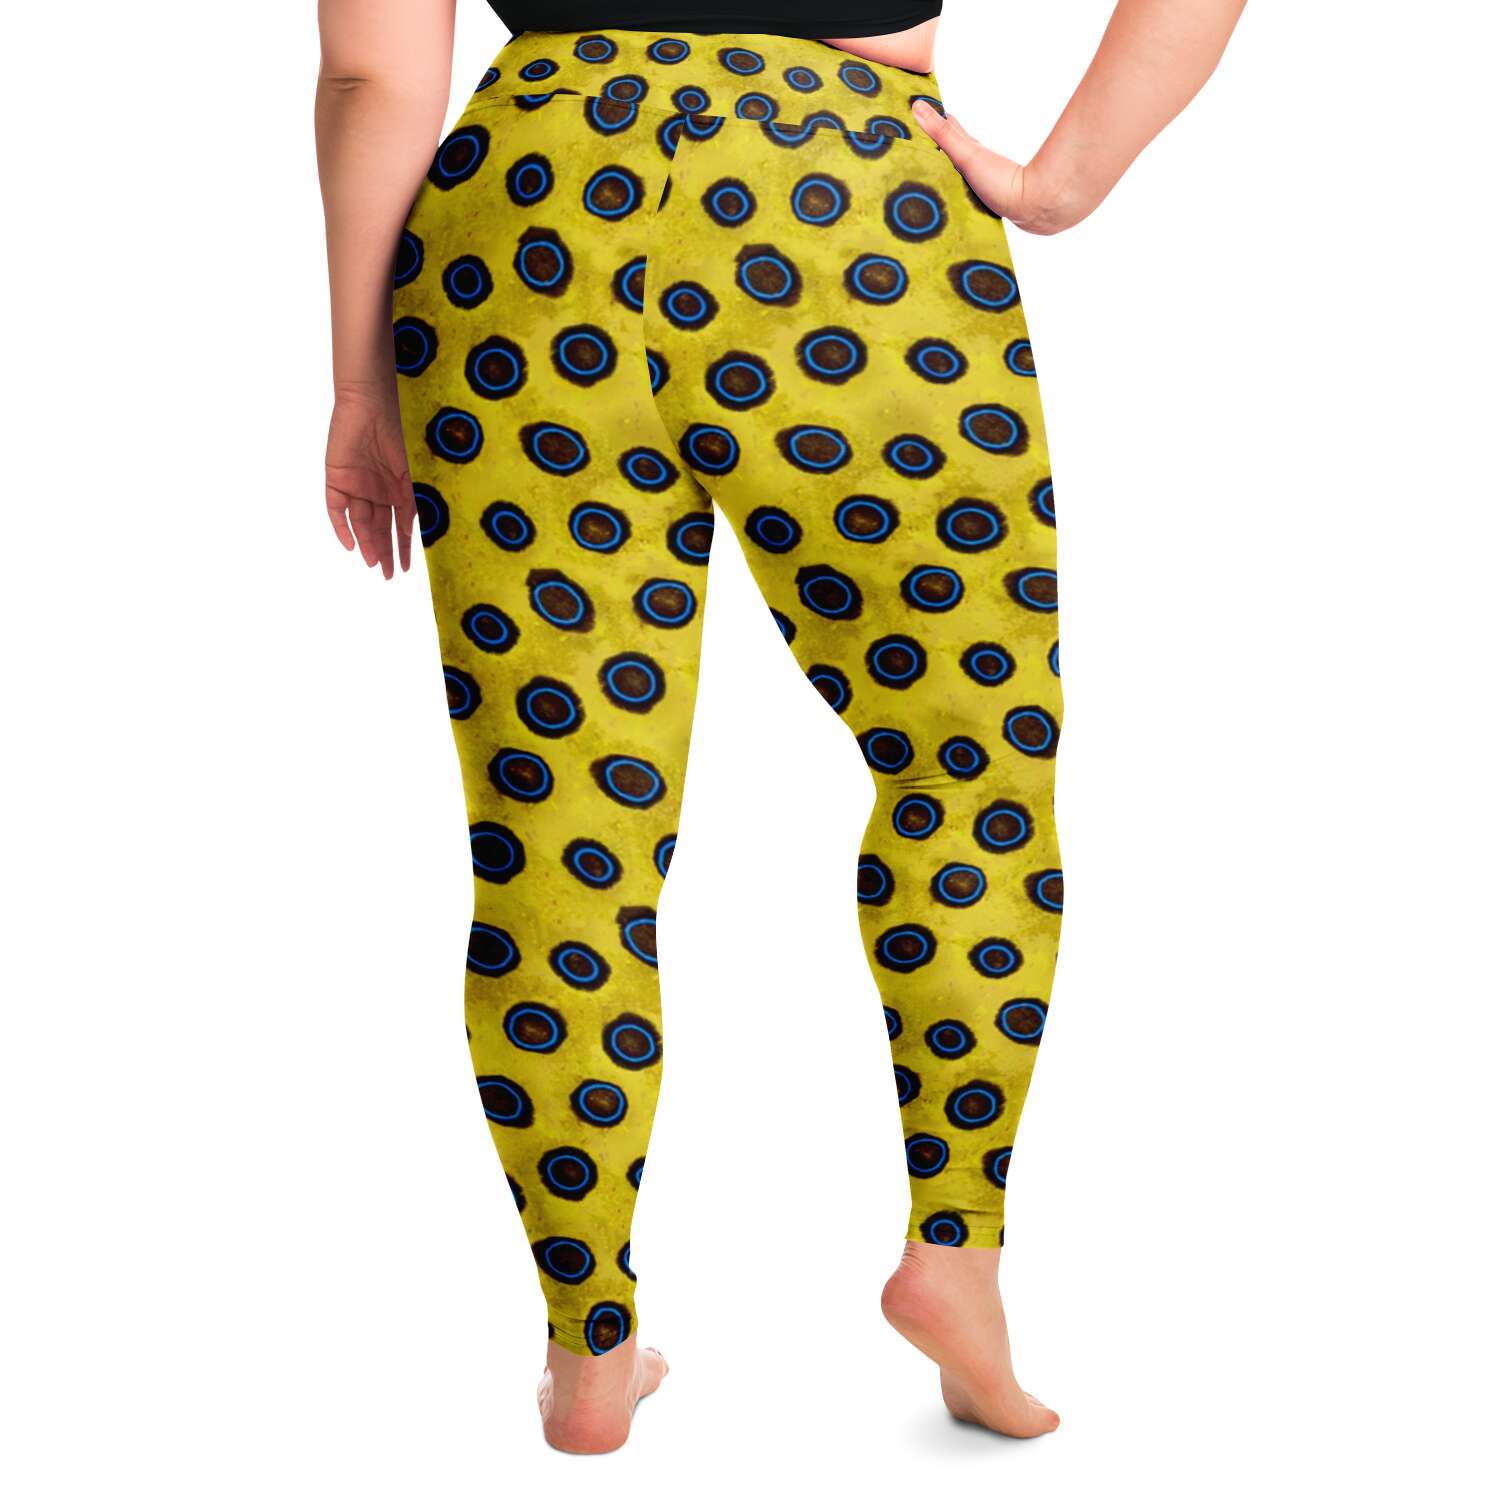 Blue-ringed octopus leggings on model for back view for scuba diving and yoga